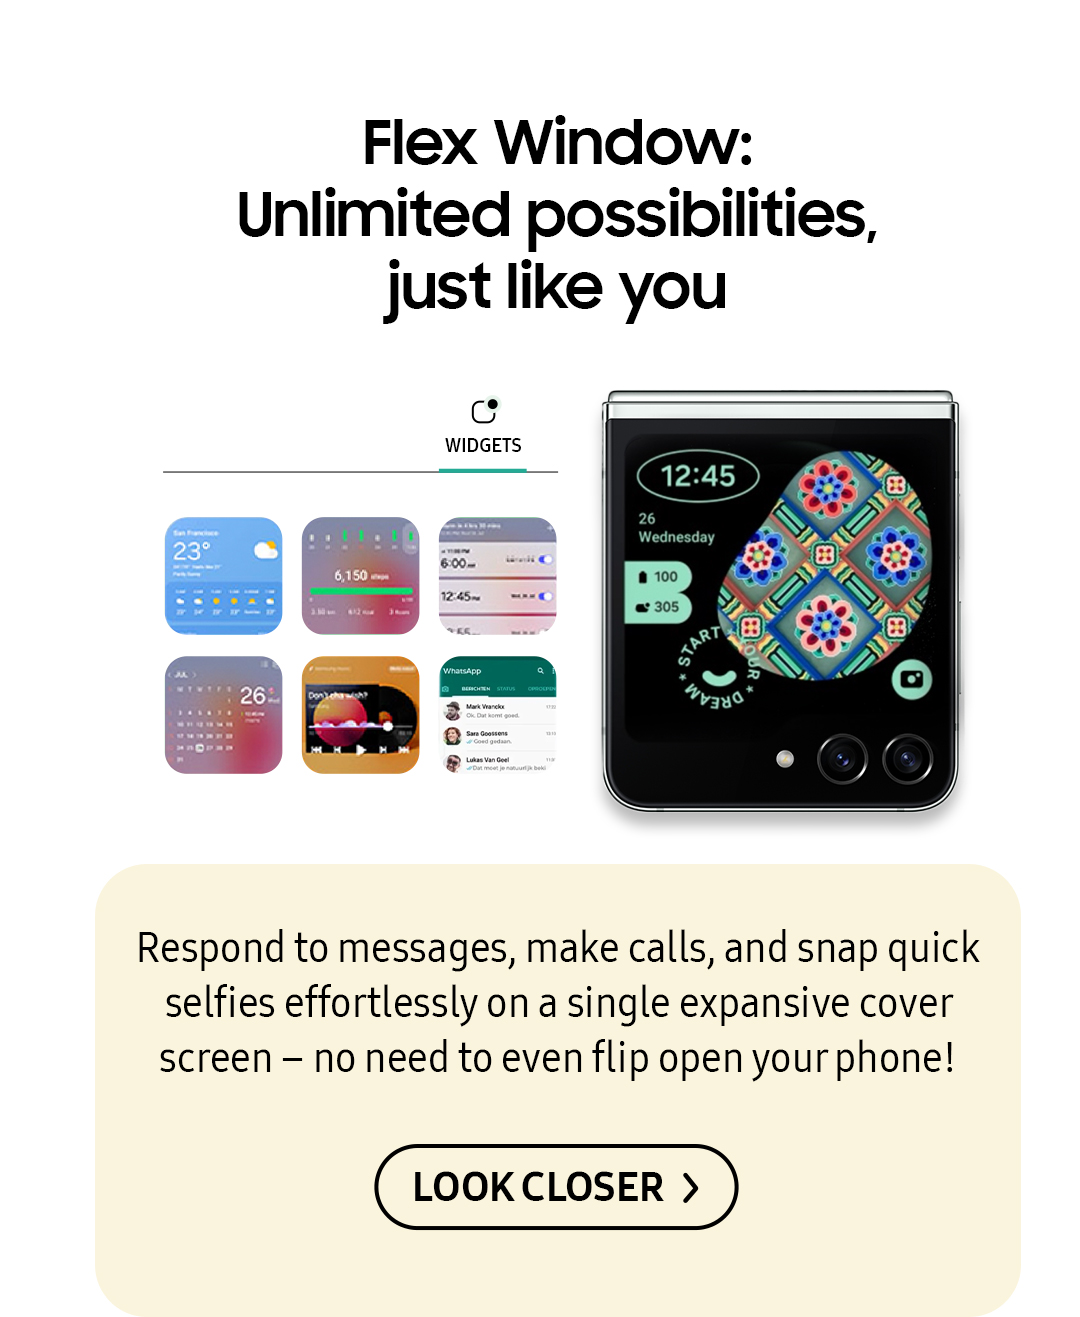 Flex Window: Unlimited possibilities, just like you | Respond messages, make calls, and snap quick selfie effortlessly on a single expansive cover screen - no need to even flip open your phone! Click here to learn more!